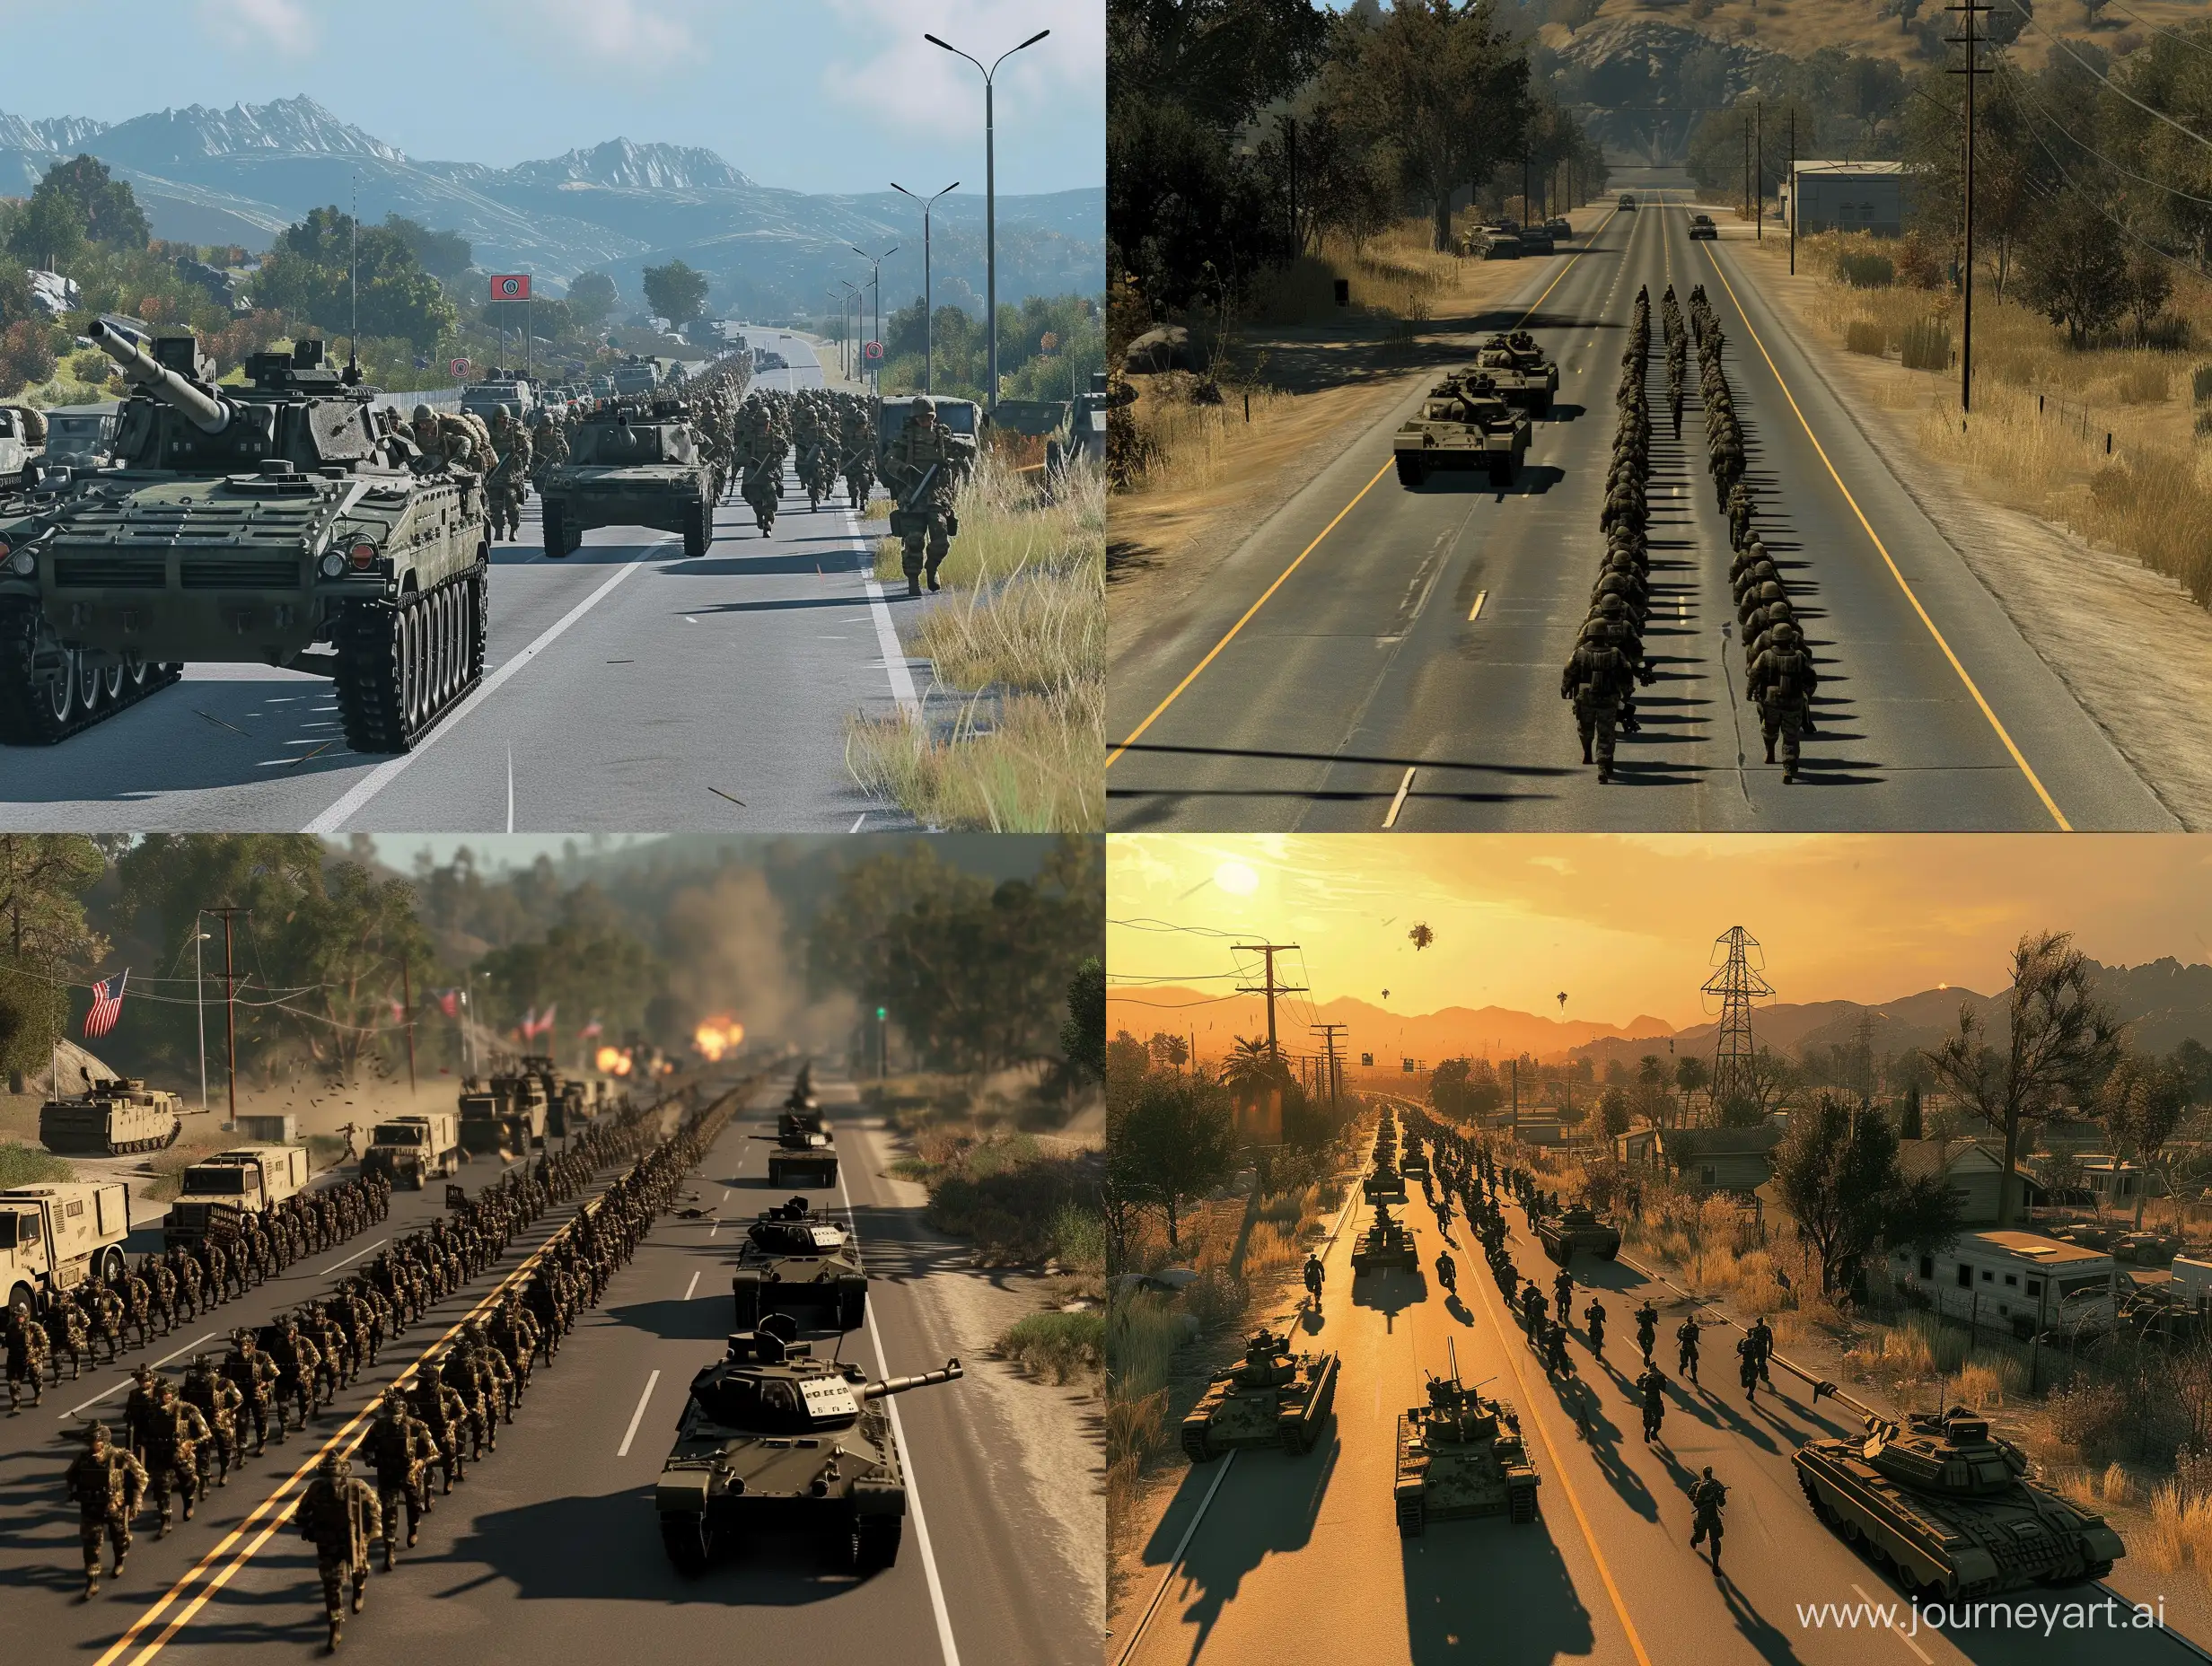 US-Army-Convoy-Marching-with-Vehicles-and-Tanks-in-Photorealistic-Daytime-Scene